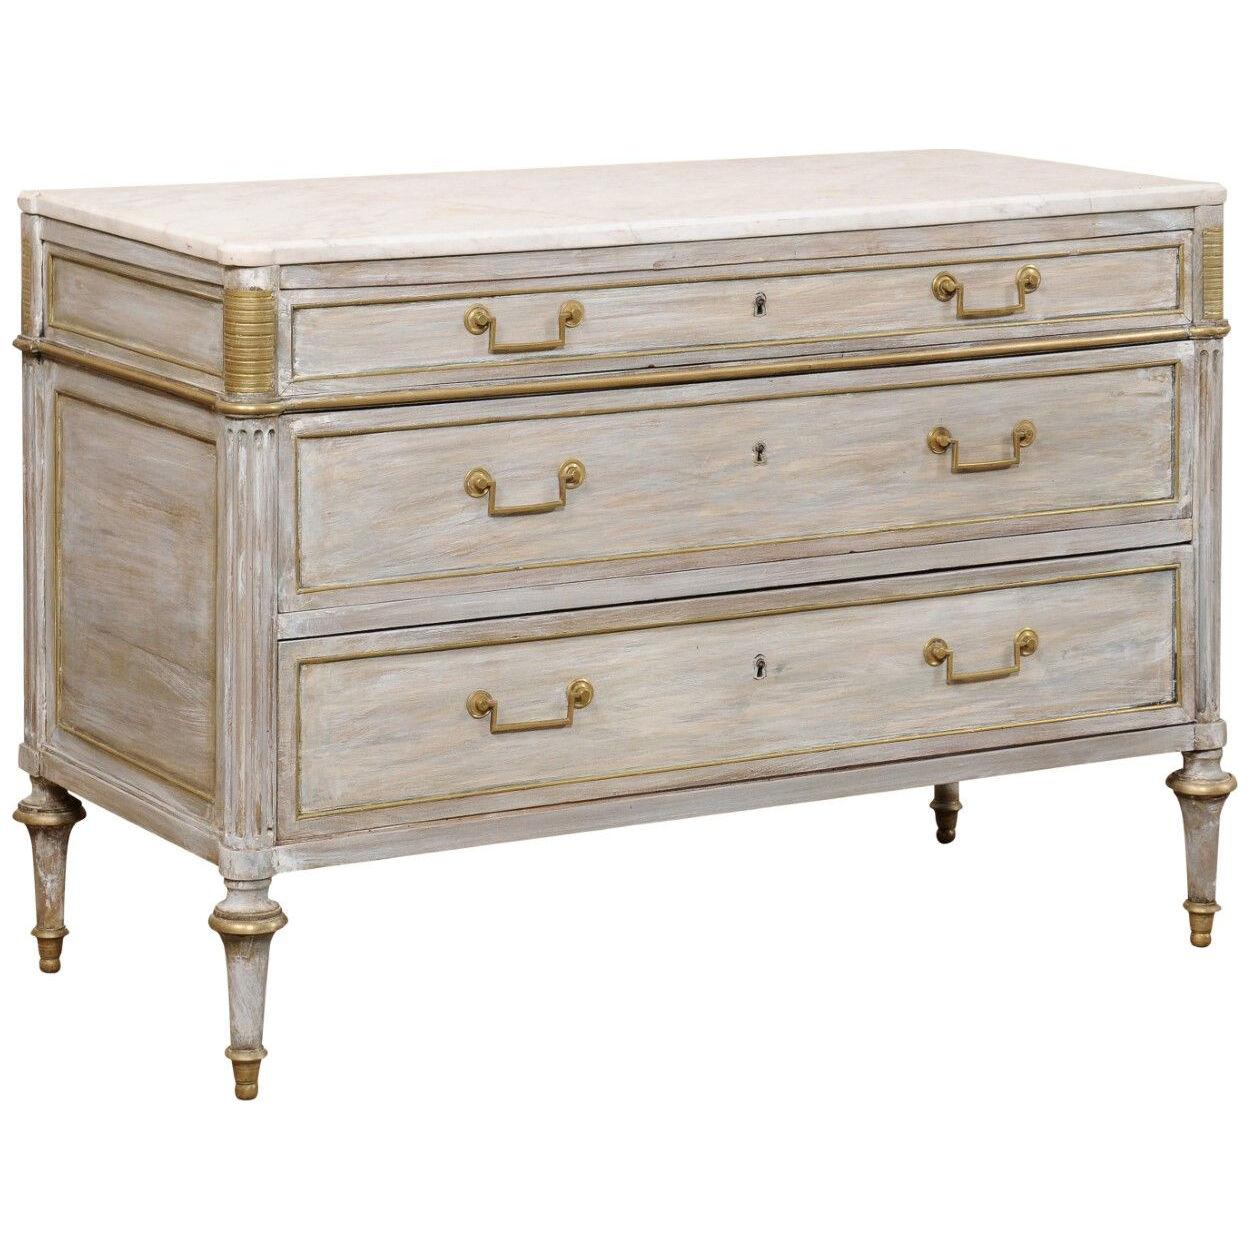 French Neoclassical Period Marble Top Chest